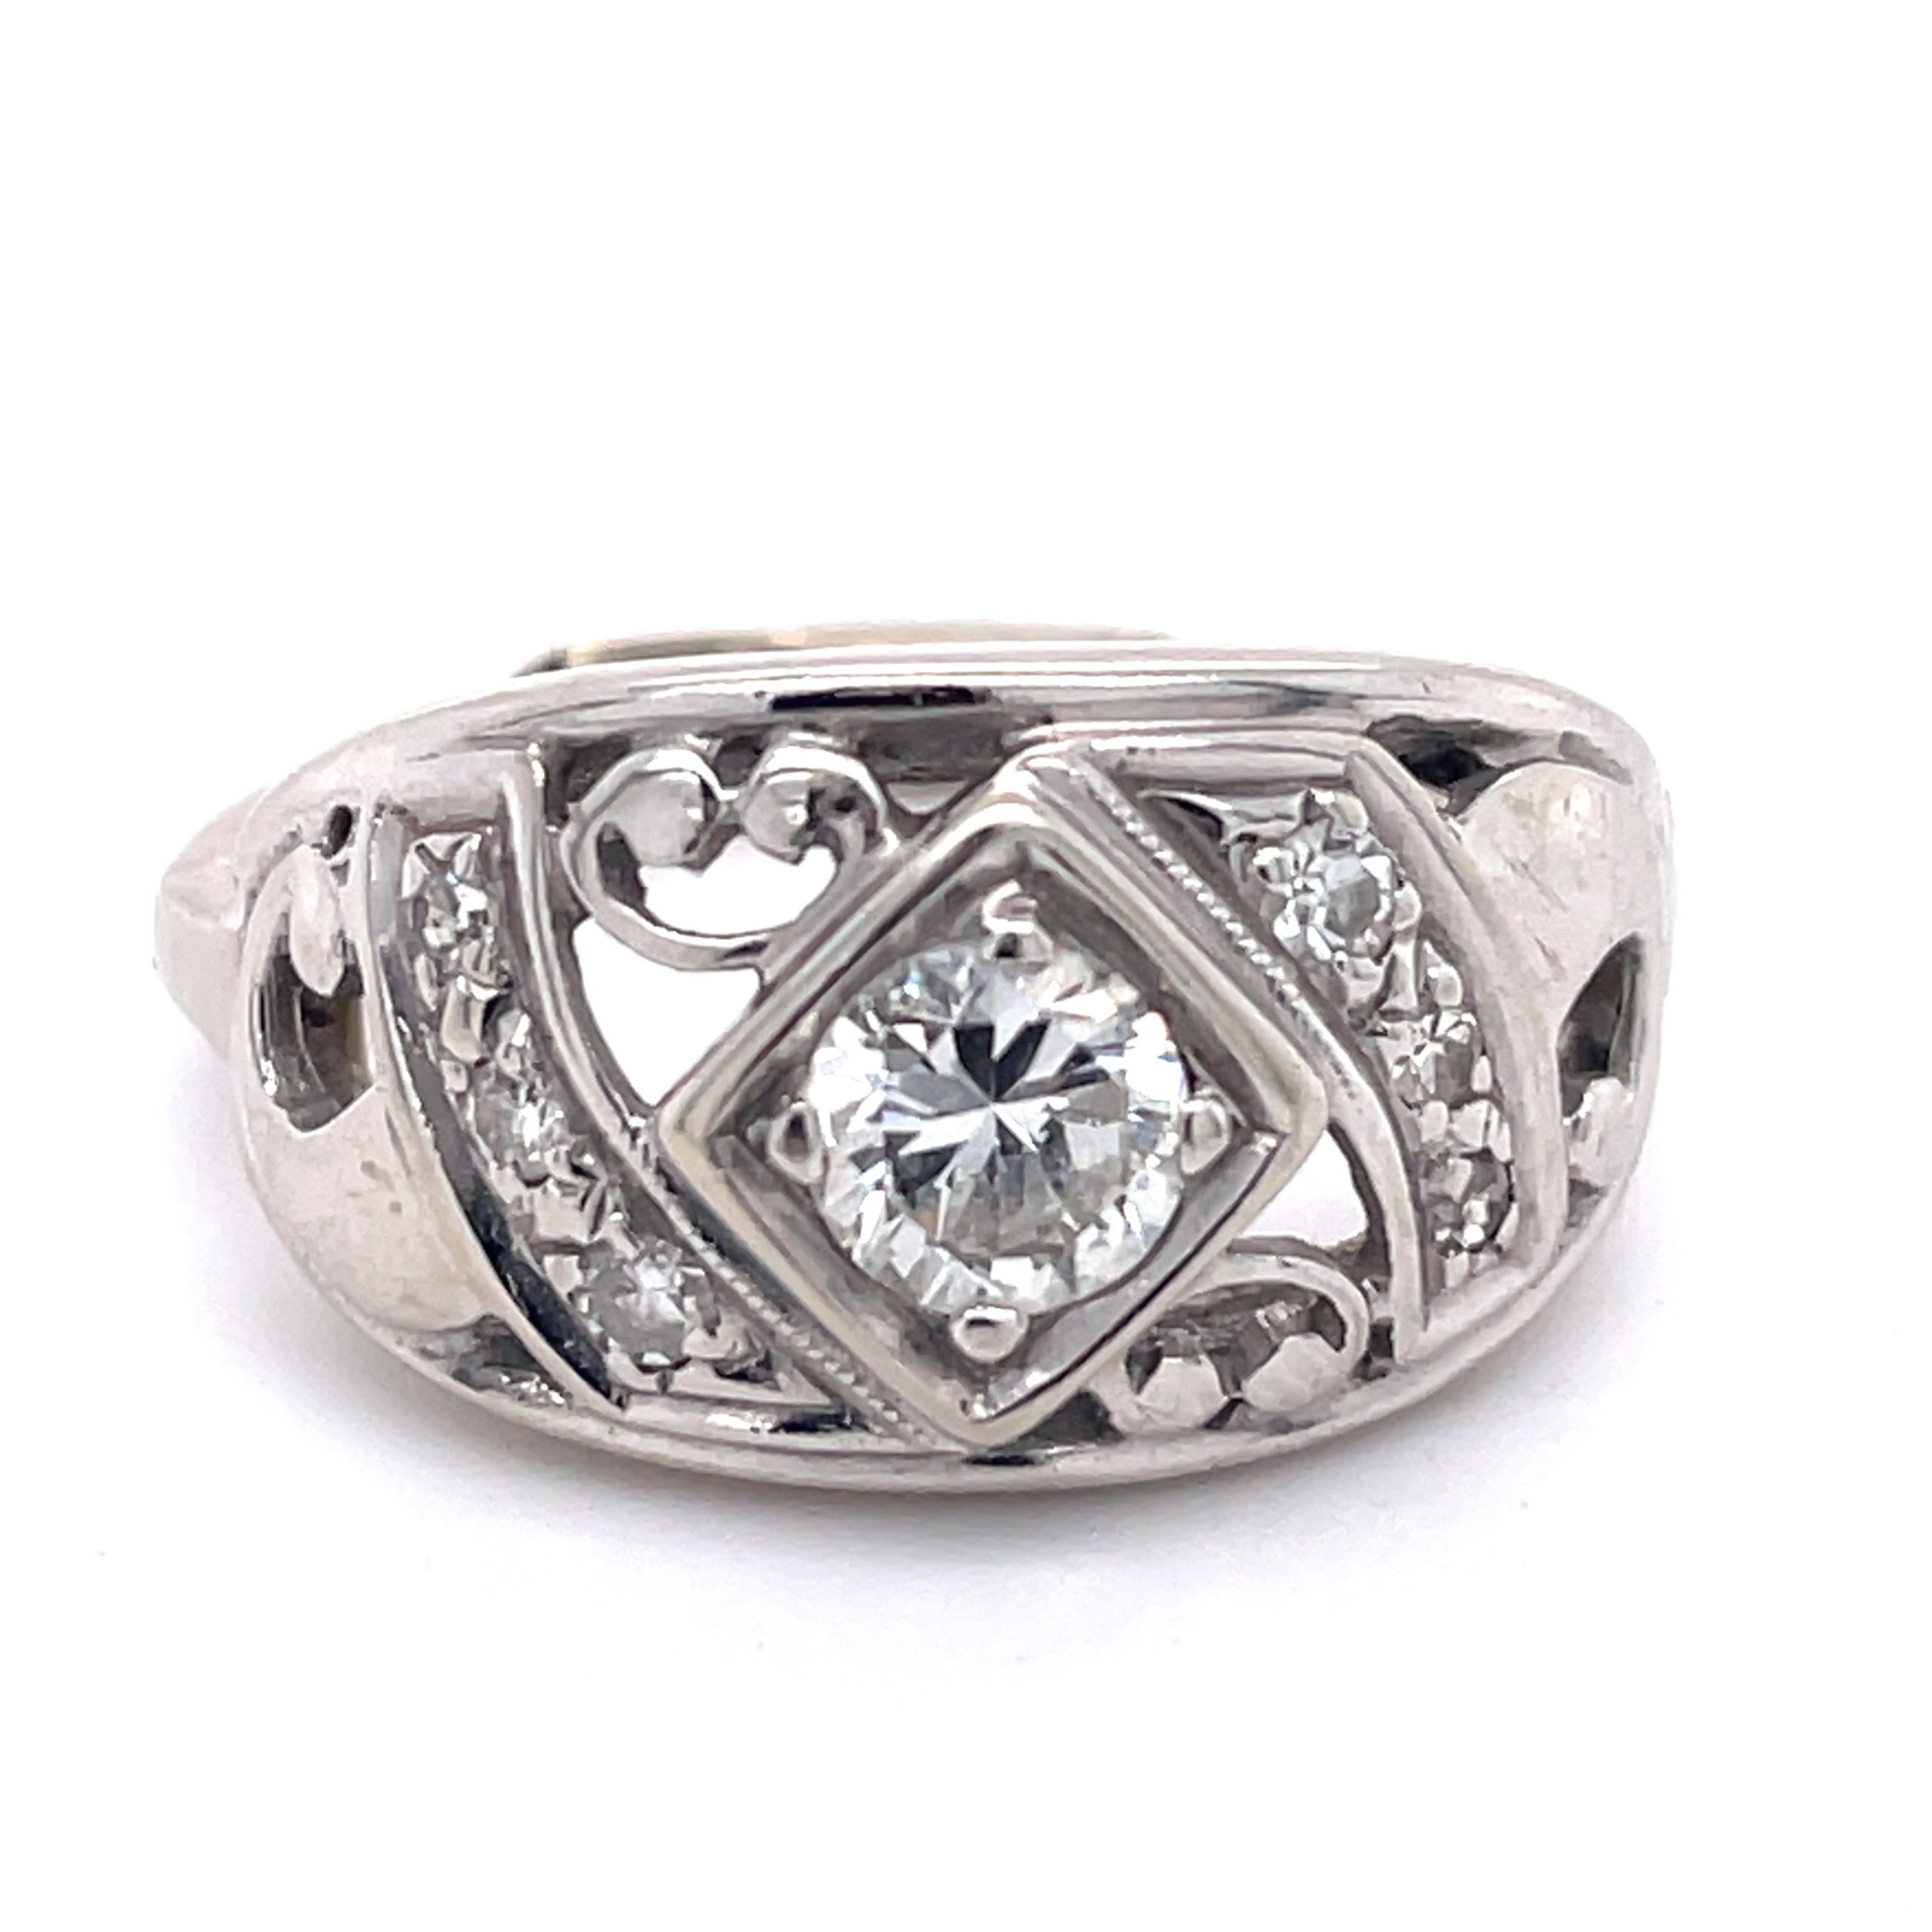 This ring has an easy slip-on/off gadget in its shank. so that it's easier to get the ring through the finger joint and onto the finger

~~ S e t t i n g ~~
Solid 14k White Gold
4.7 grams
Ring Size 6.25 US
 
~~ Stones ~~


Main Stone:
Old European